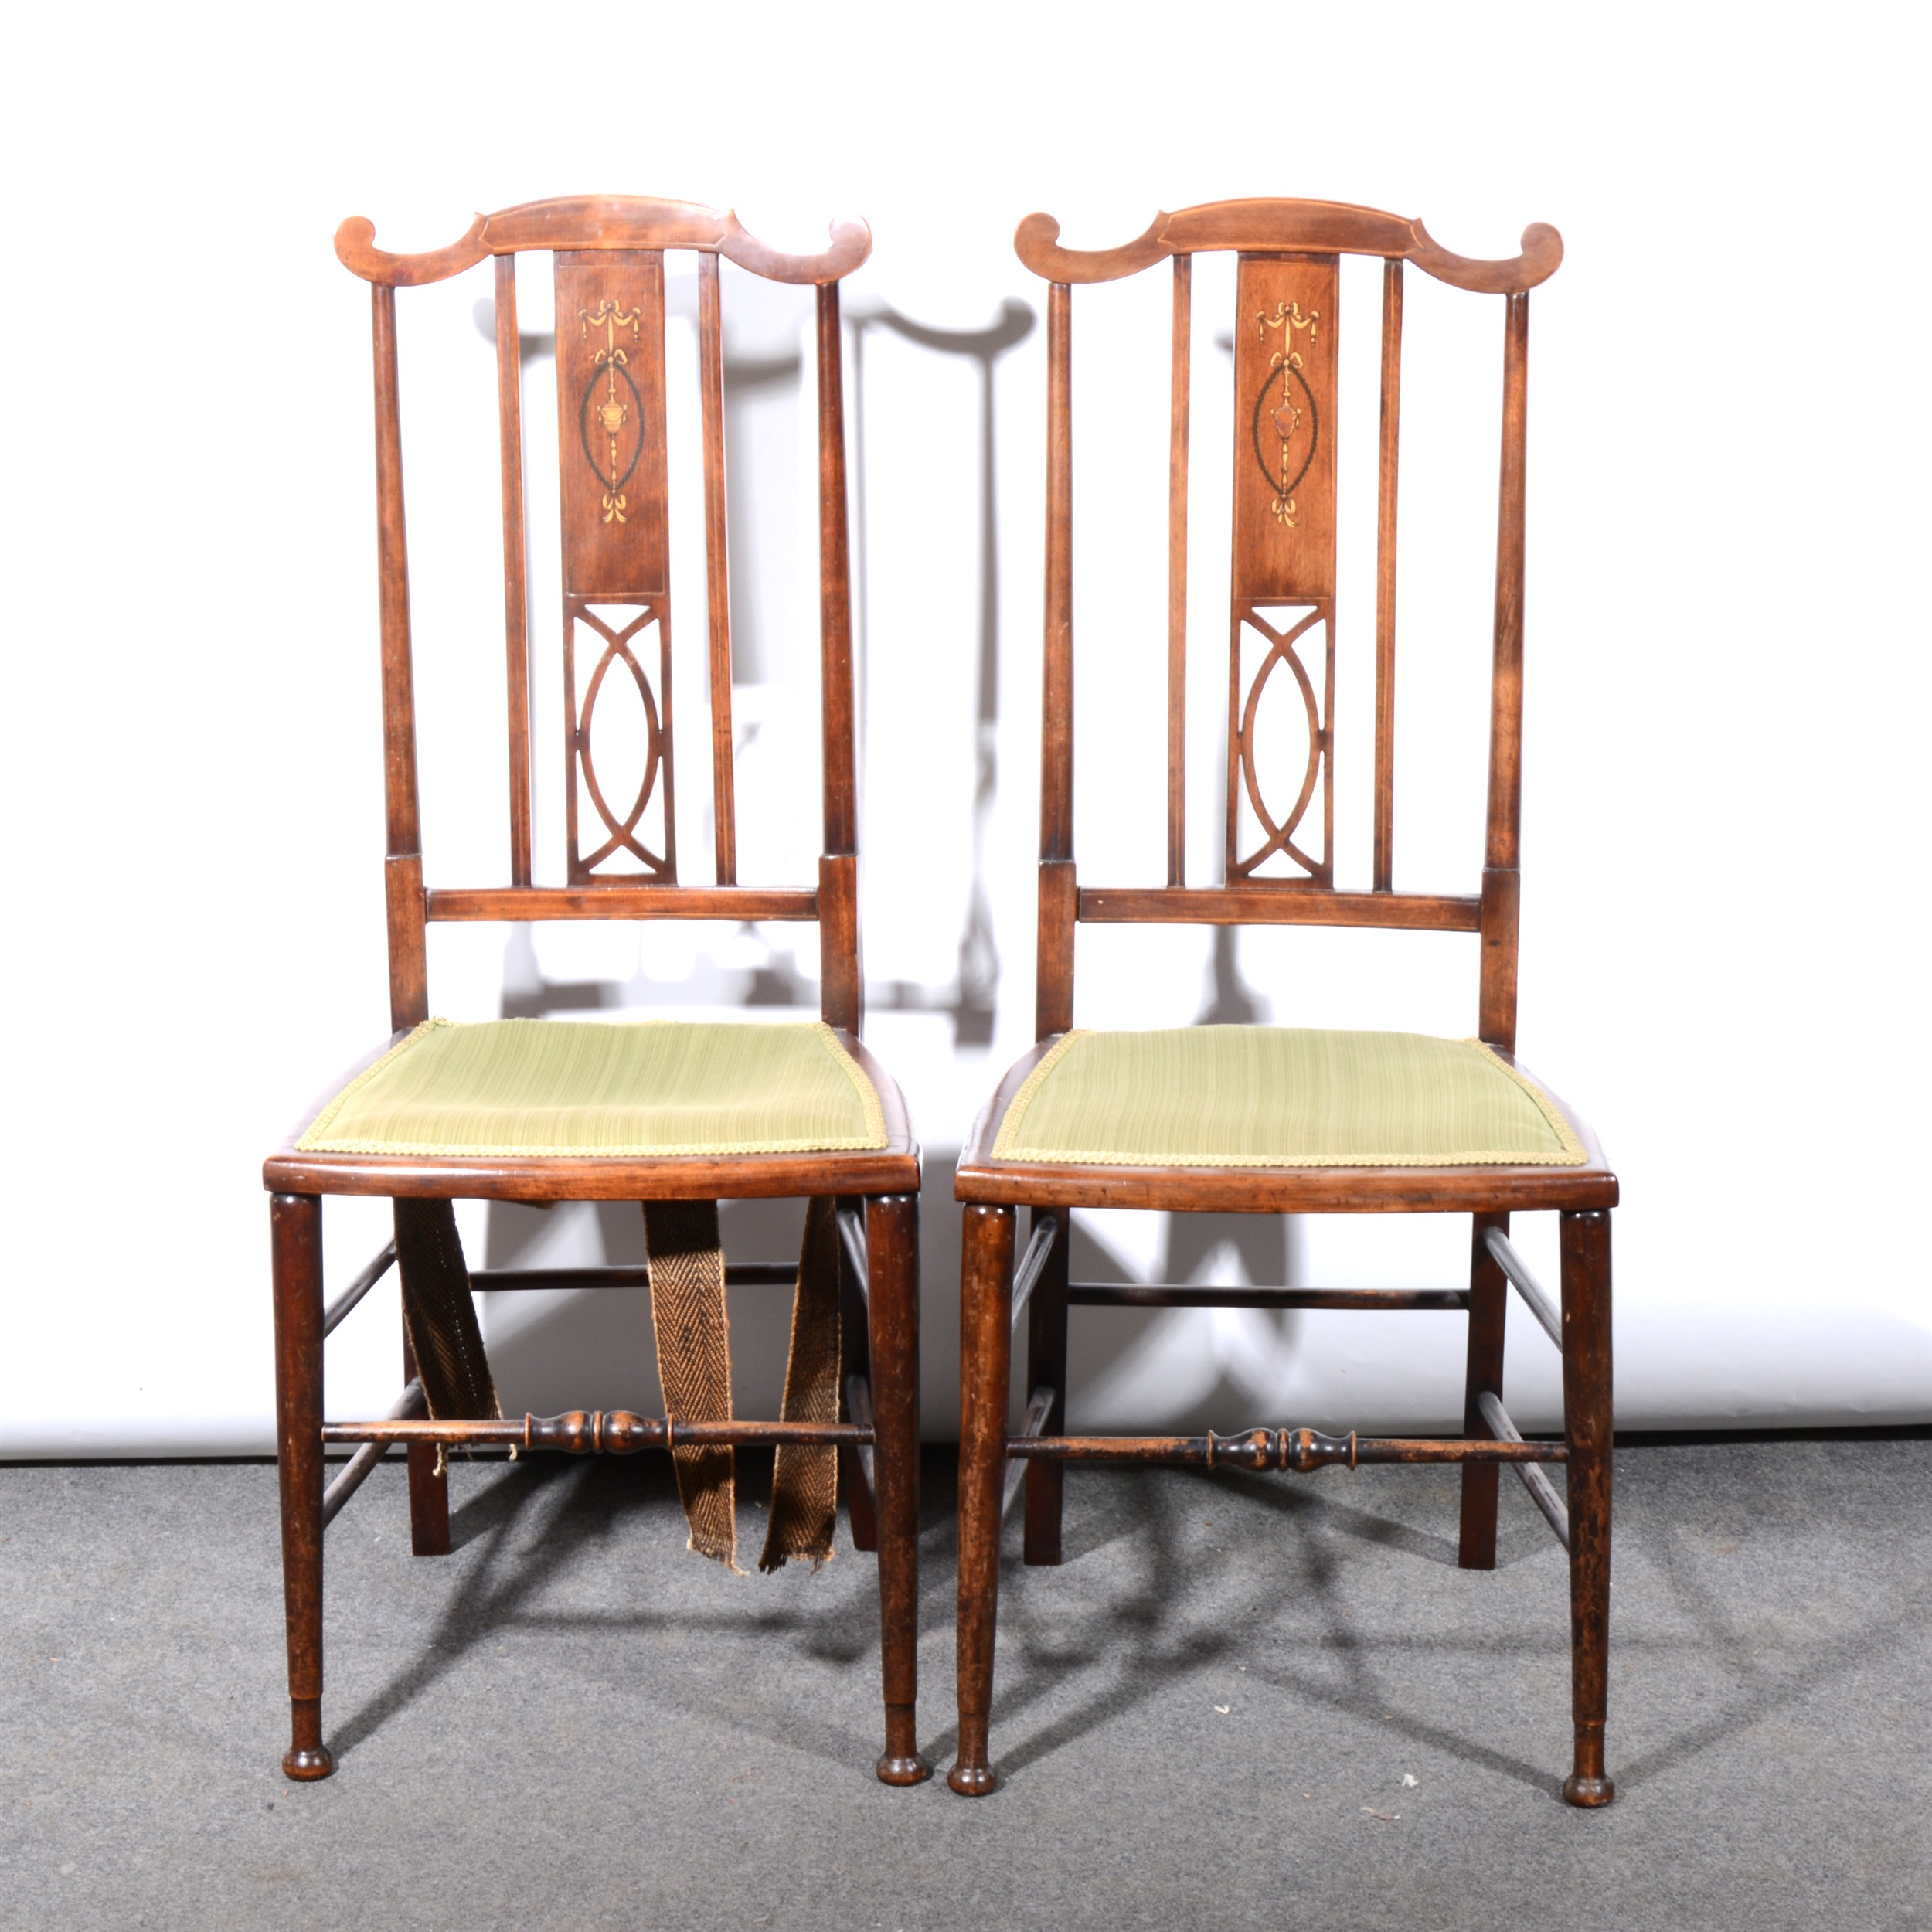 A pair of Edwardian stained wood bedroom chairs